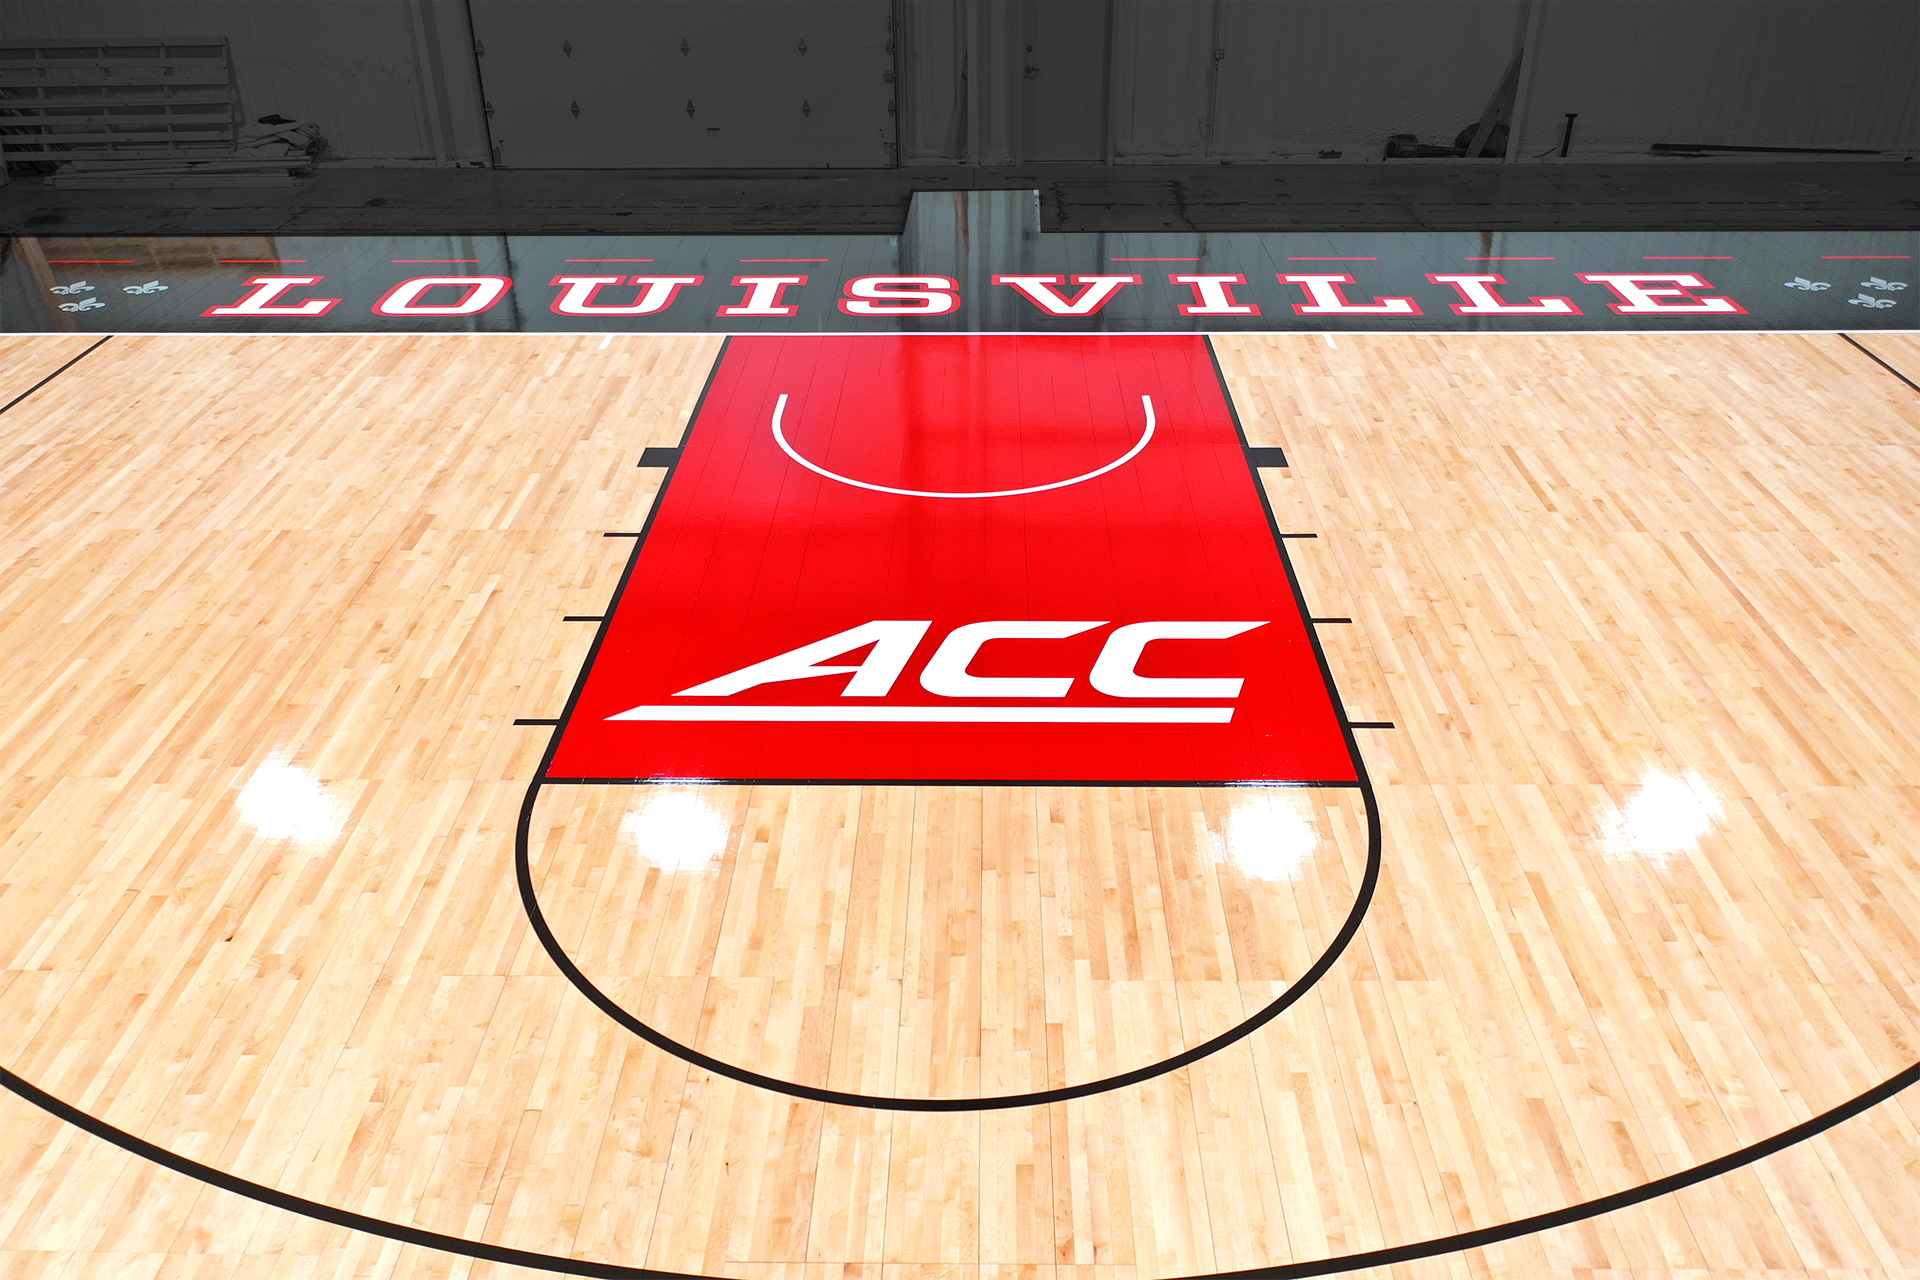 ACC conference lane logo and baseline lettering